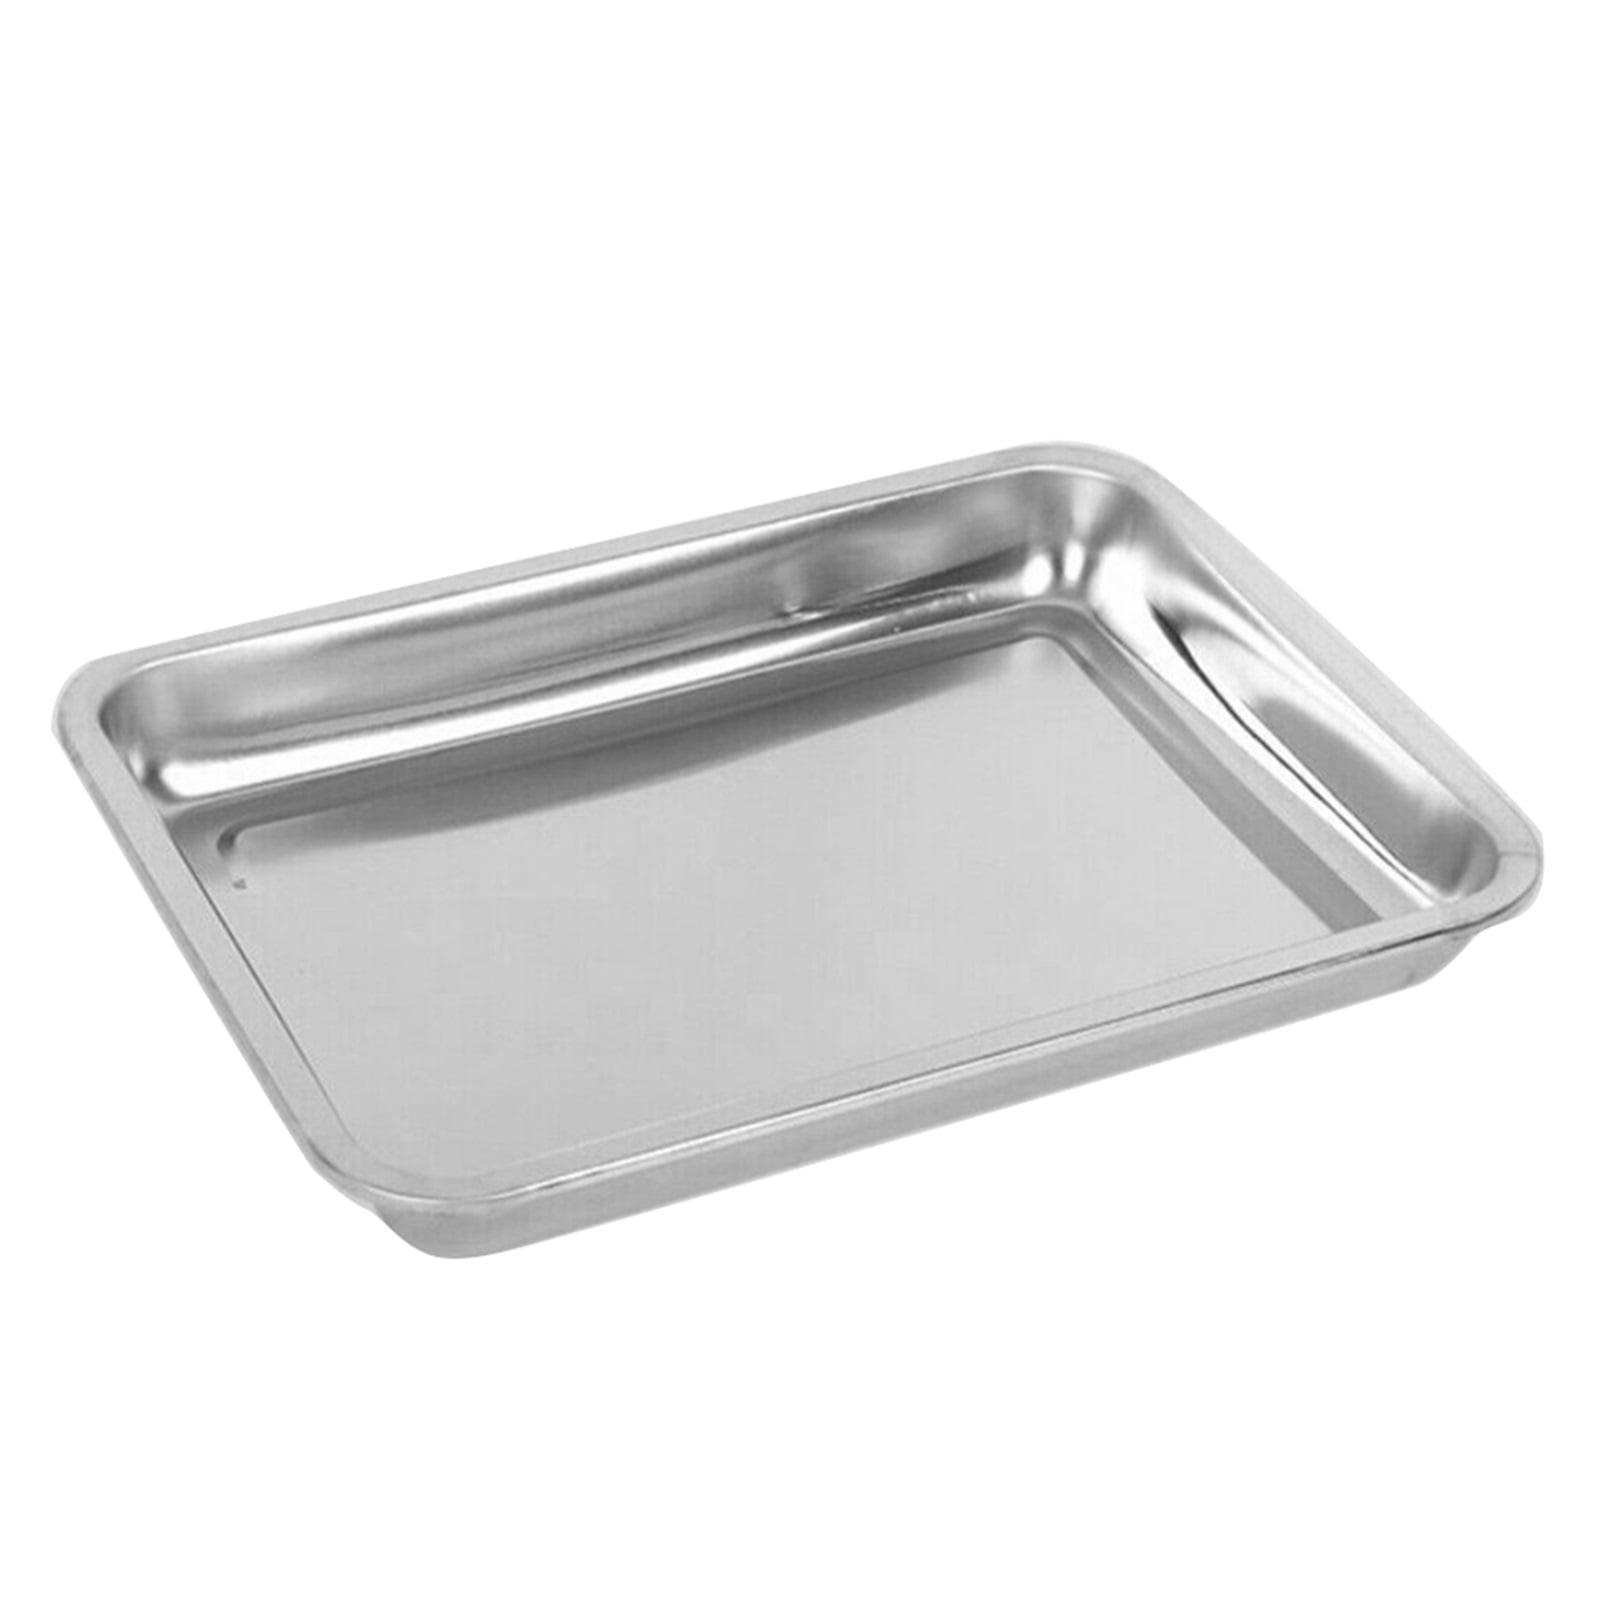 Baking Sheet Pans For Toaster Oven, Small Stainless Steel Cookie Sheets  Metal Bakeware Pan, Sturdy